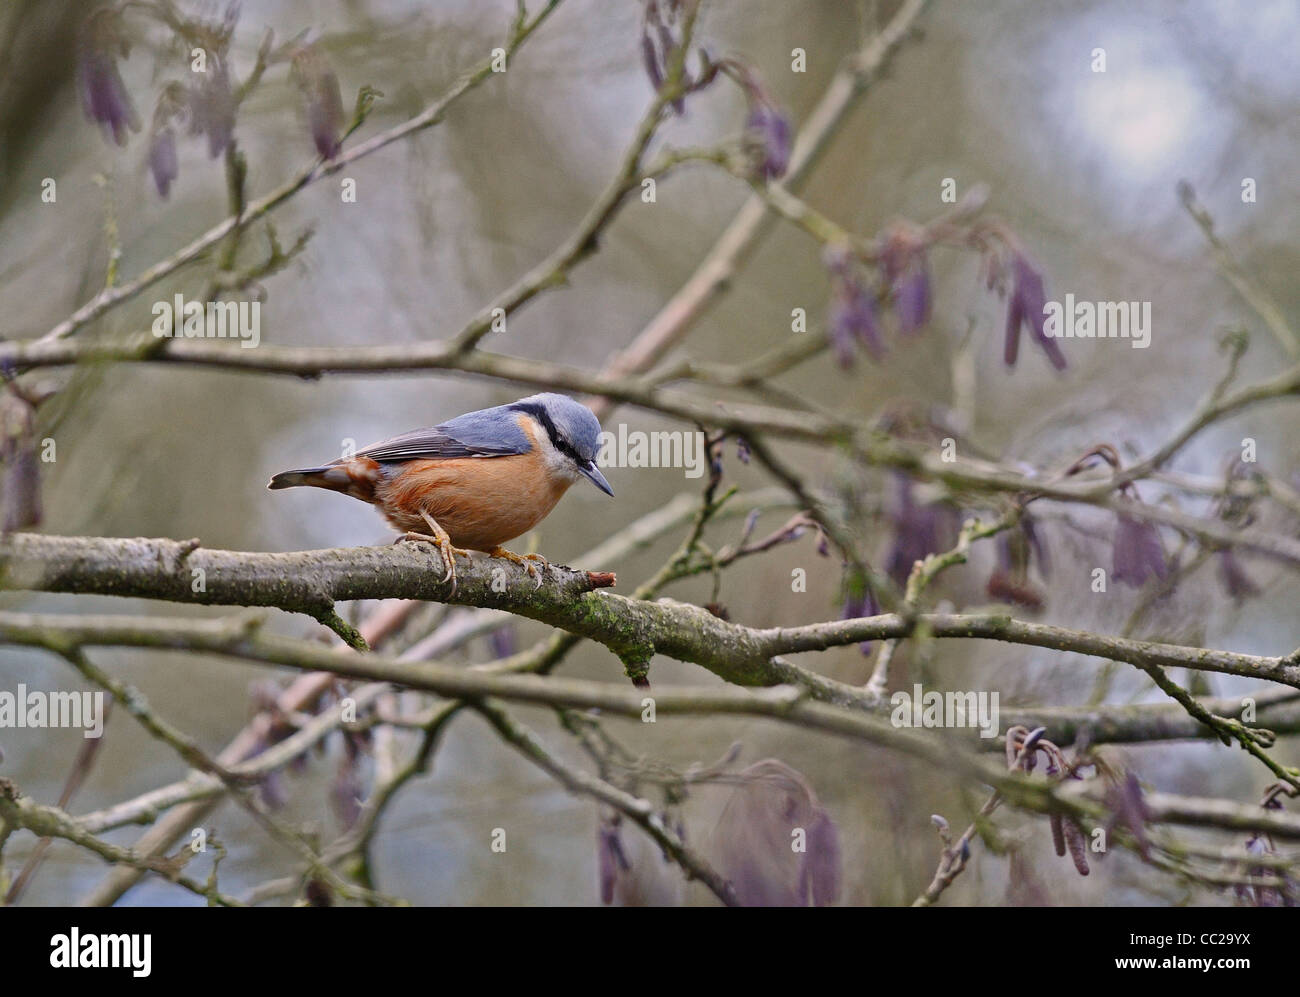 A Nuthatch, a small plump woodland bird sitting on branch. Stock Photo